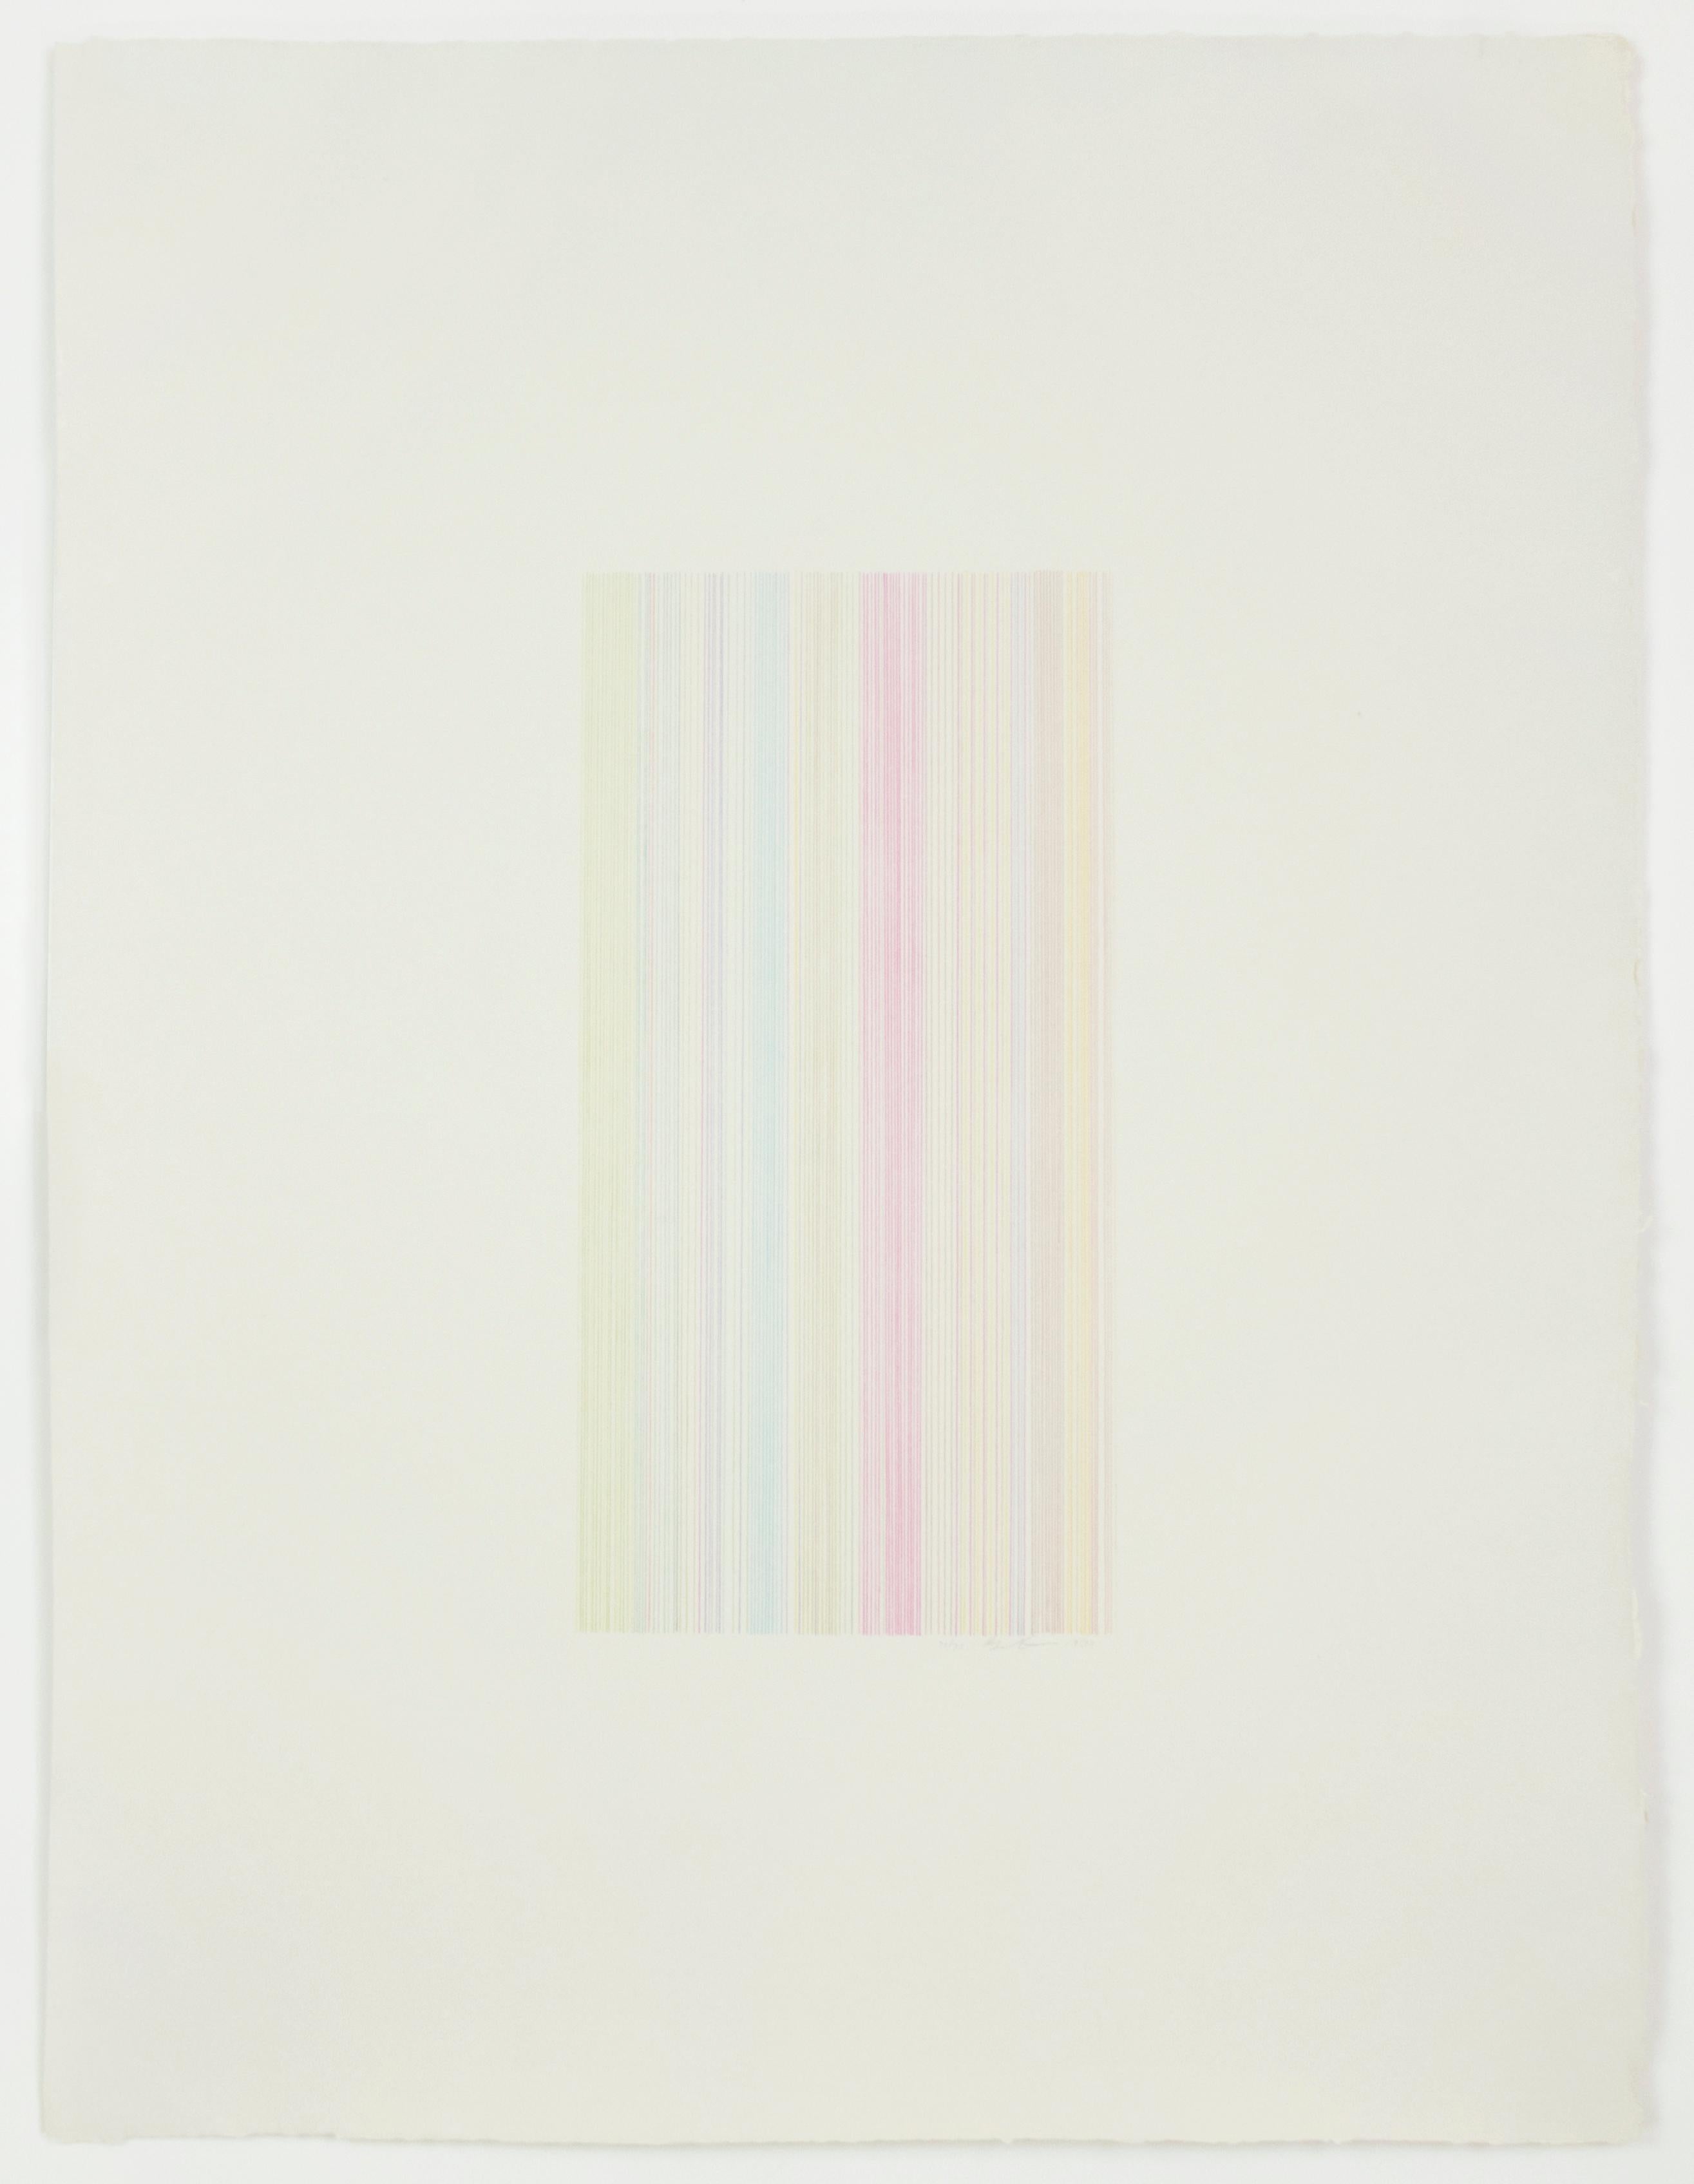 Gene Davis Print - Witch Doctor: abstract modern minimalist color field drawing with rainbow colors